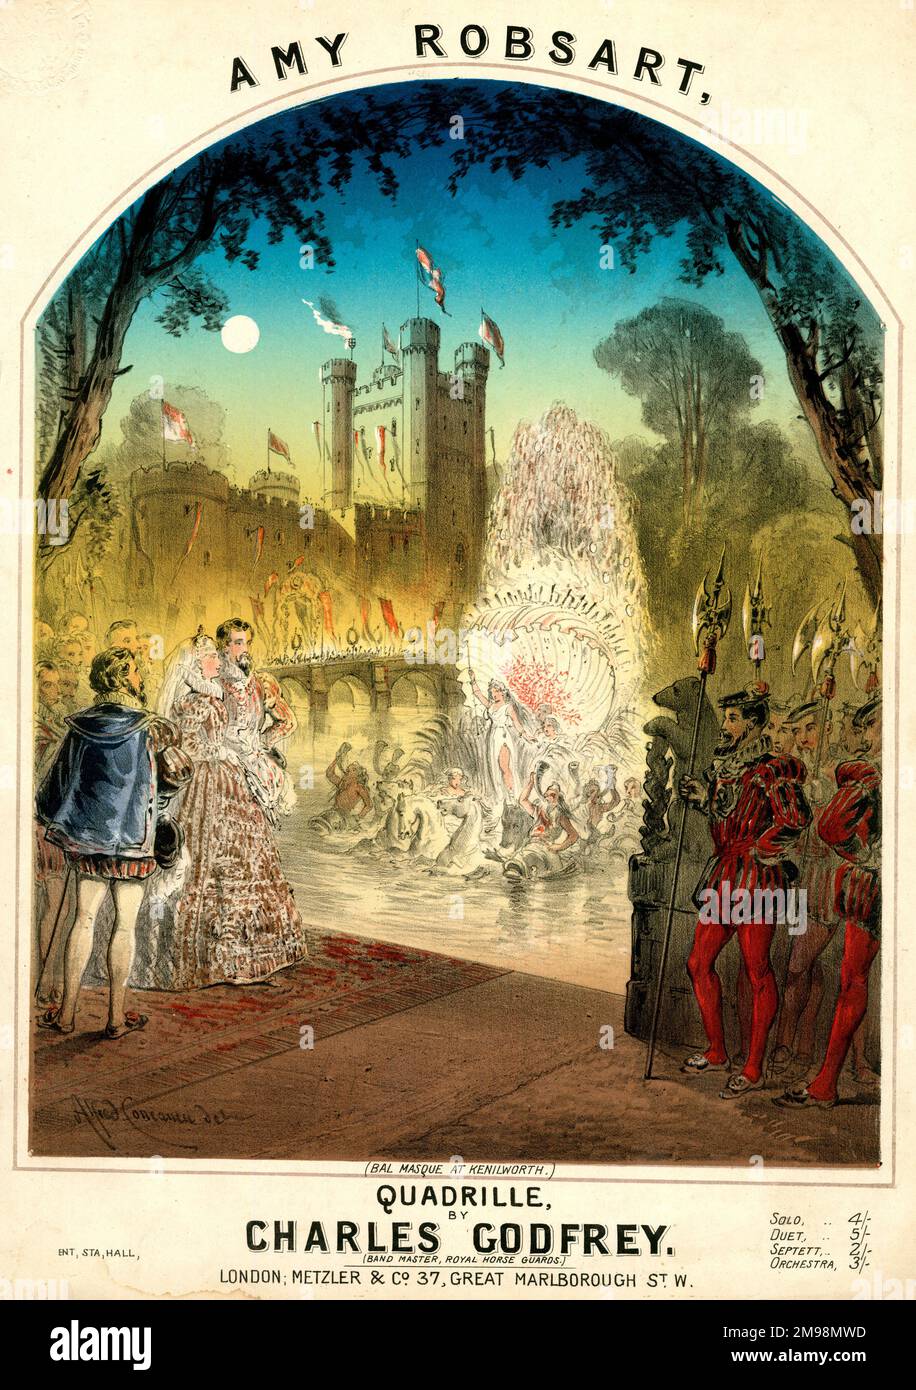 Music cover, Amy Robsart Quadrille by Charles Godfrey (Band Master of the Royal Horse Guards).  A Bal Masque at Kenilworth Castle. Superb design by Alfred Concanen. Stock Photo